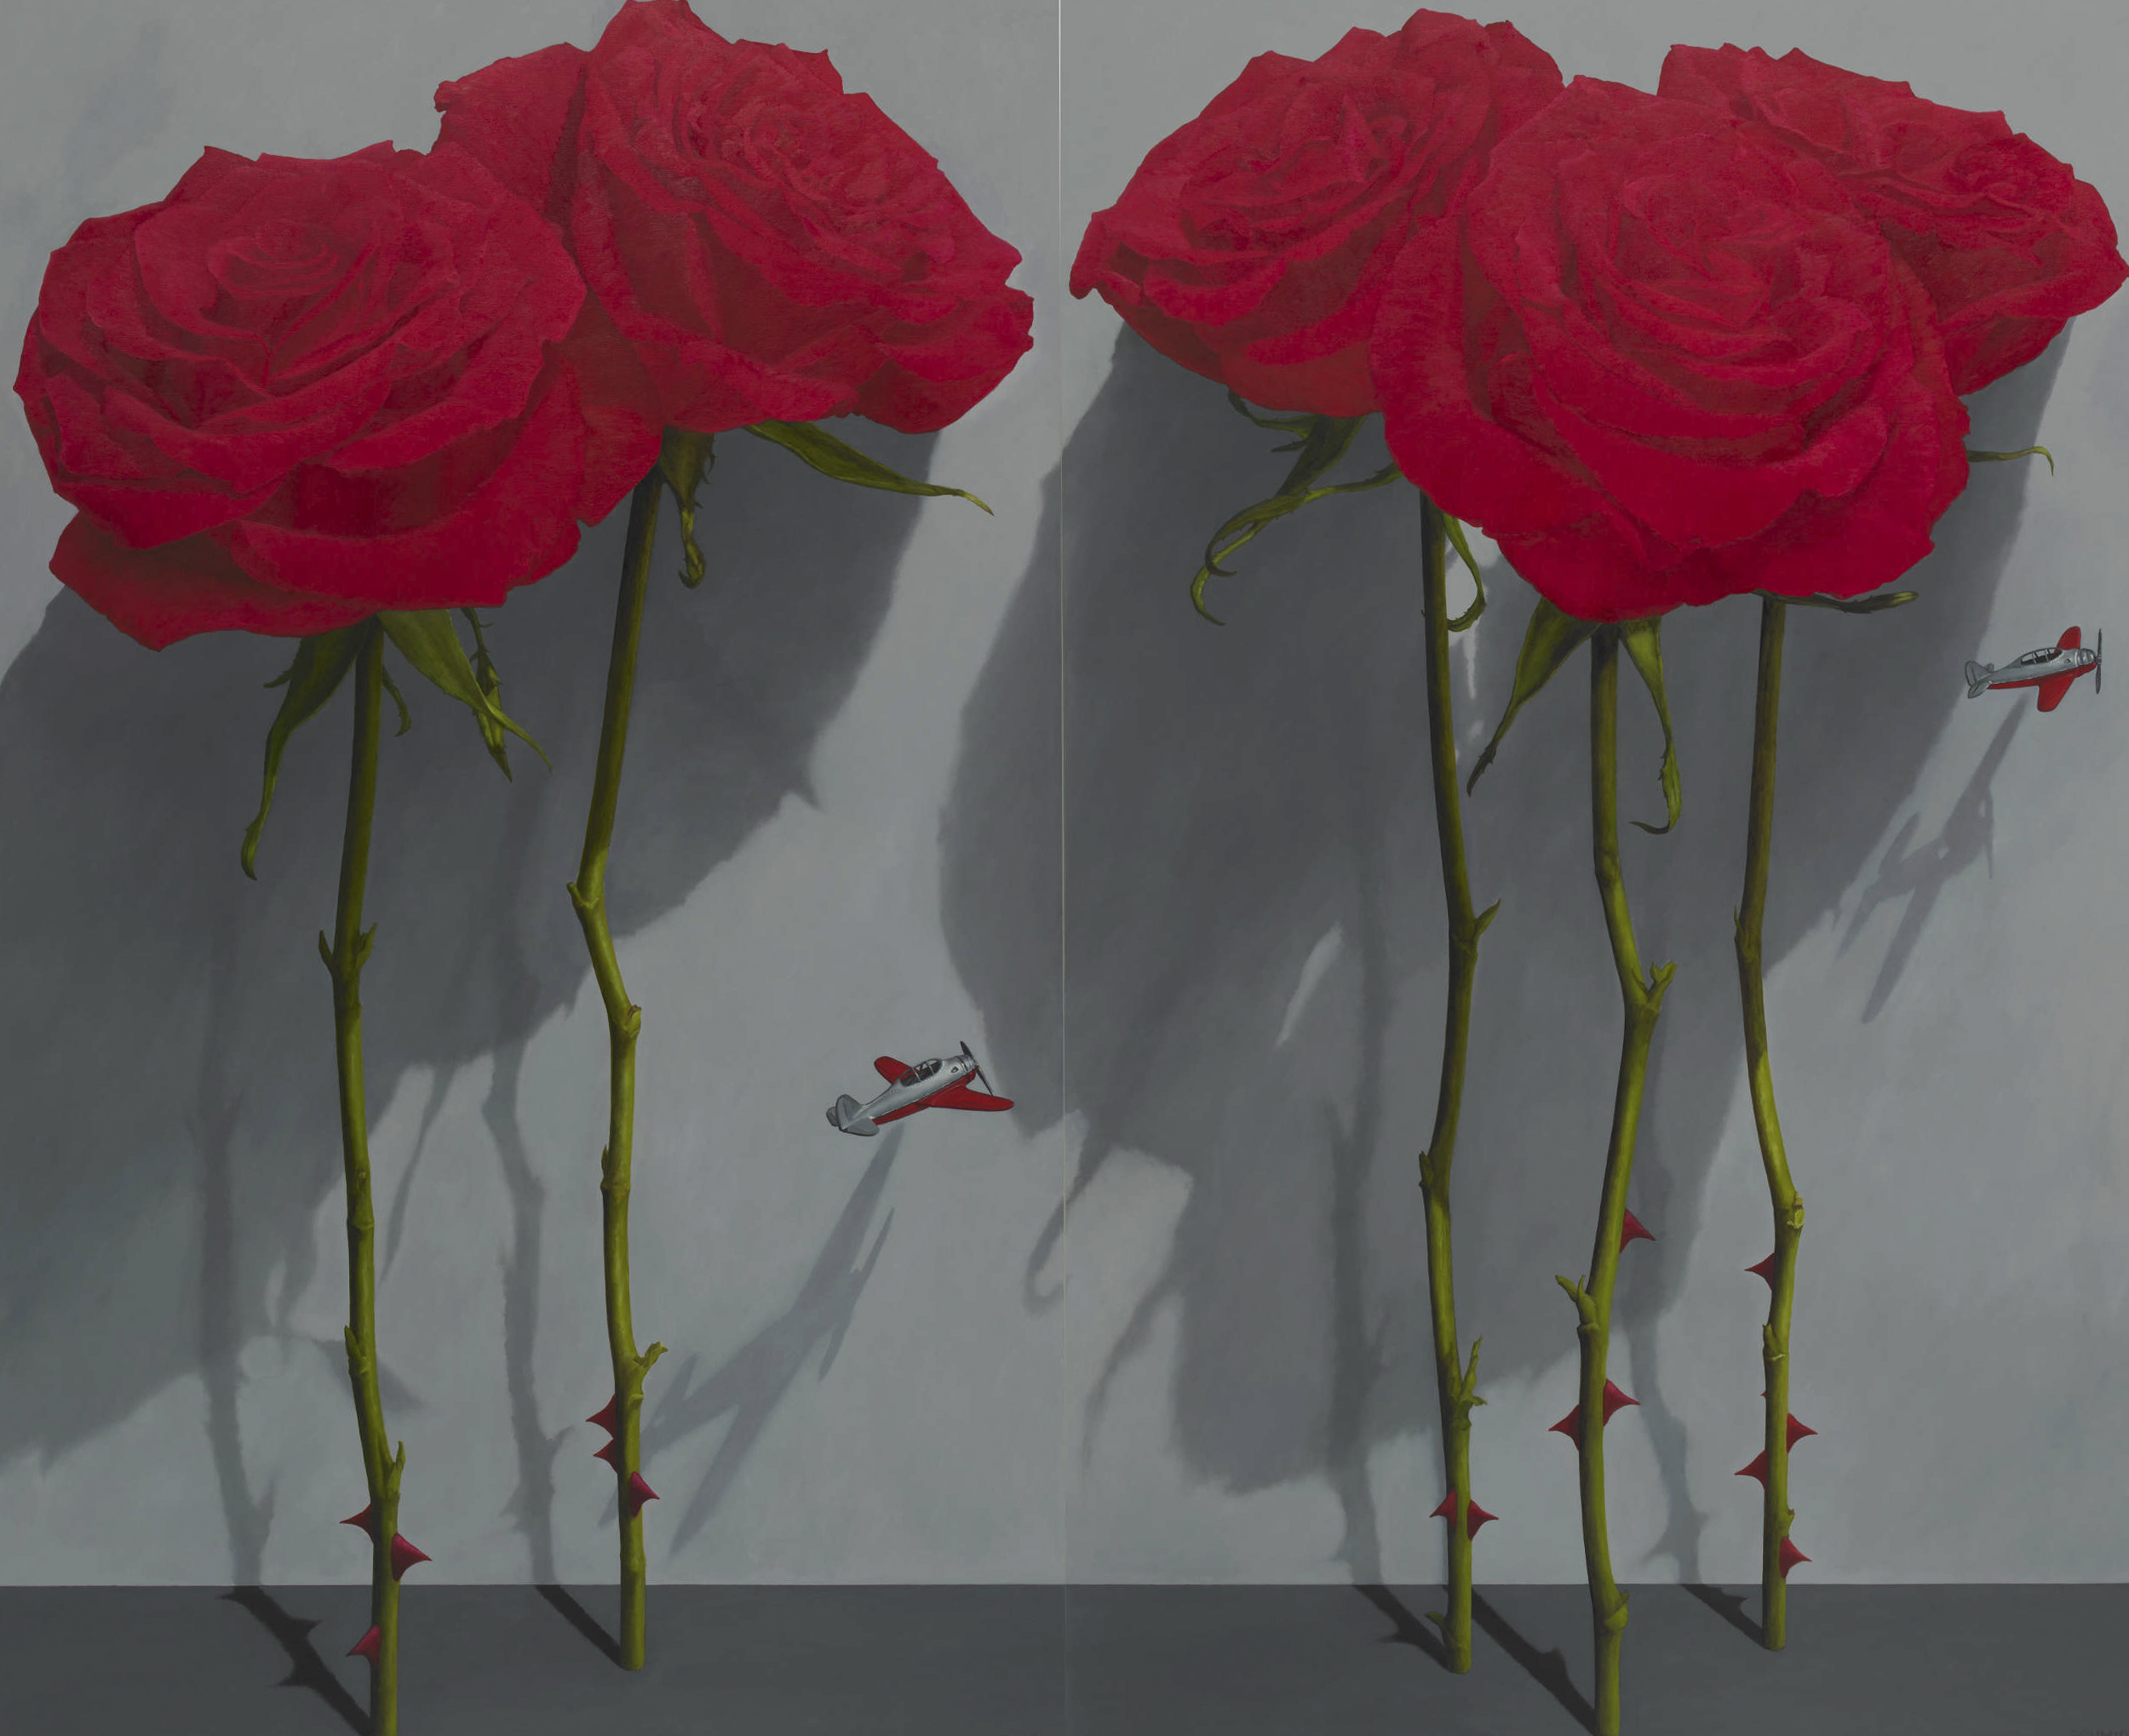 5 giant red roses, dark gray background with shadows, stems and thorns, 2 tiny red and silver airplanes flying